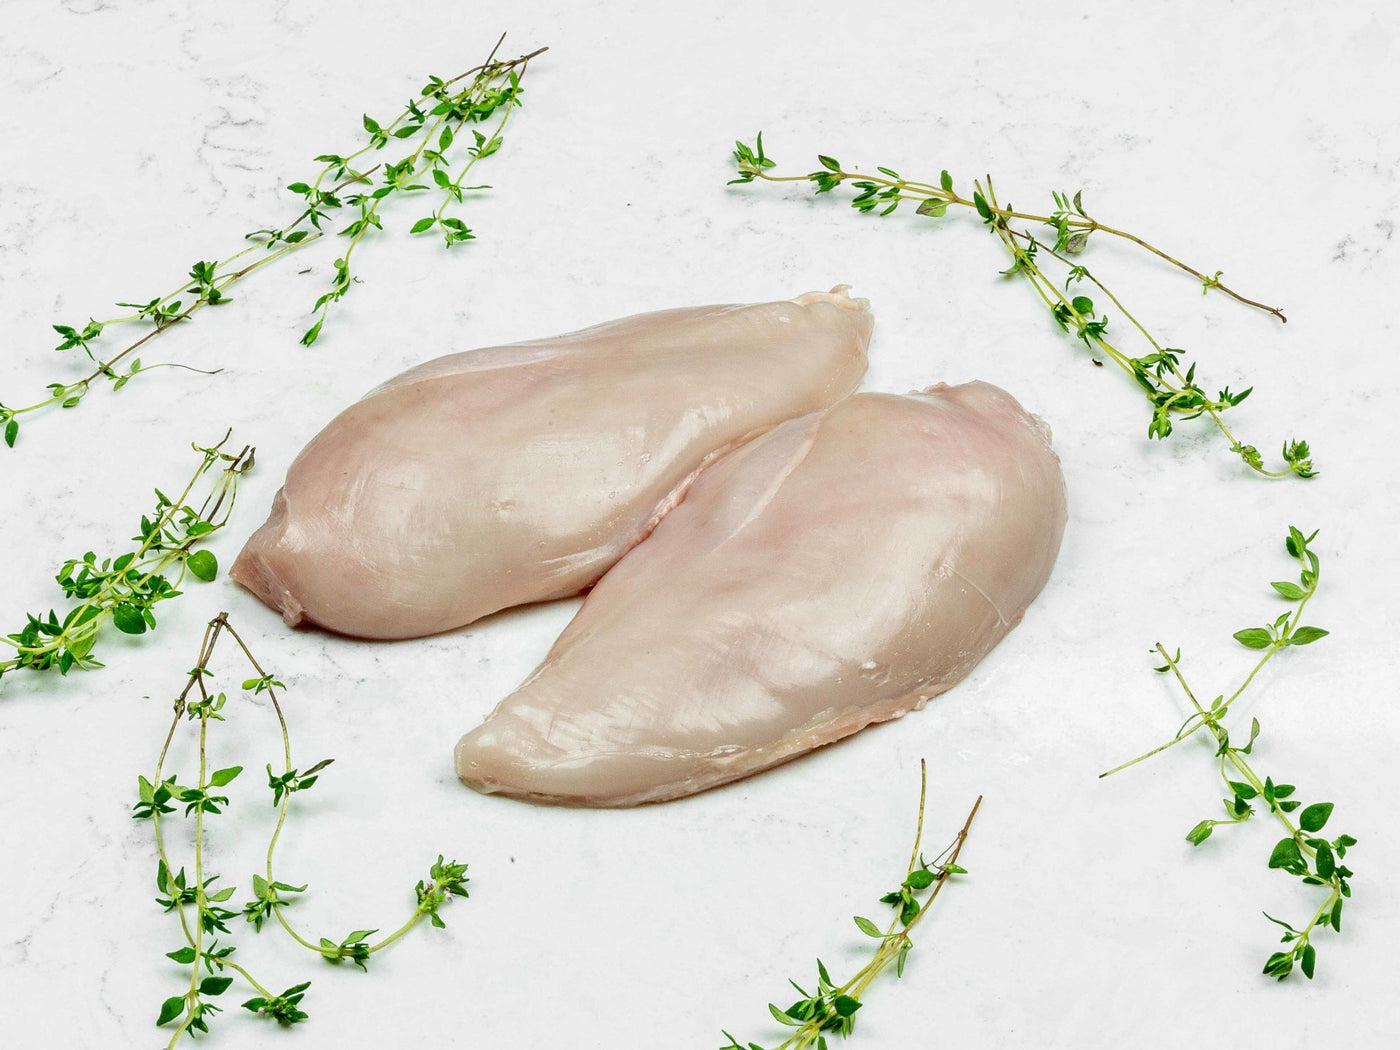 Free Range Herb Fed Chicken Breasts - Skinless - Chicken - Thomas Joseph Butchery - Ethical Dry-Aged Meat The Best Steak UK Thomas Joseph Butchery